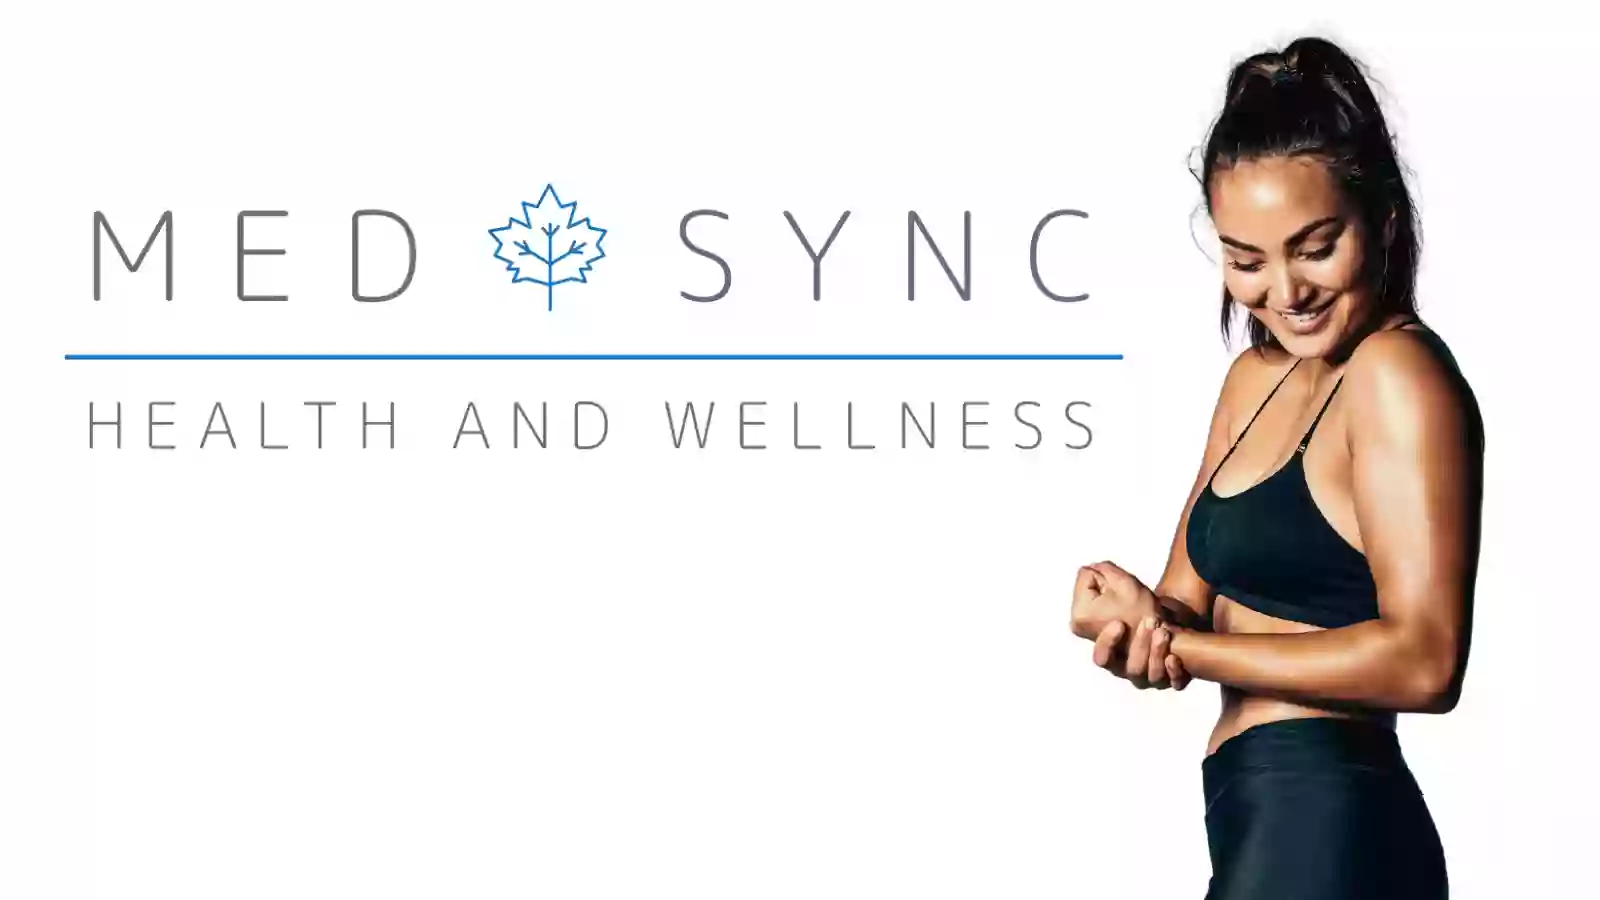 Med Sync Health and Wellness